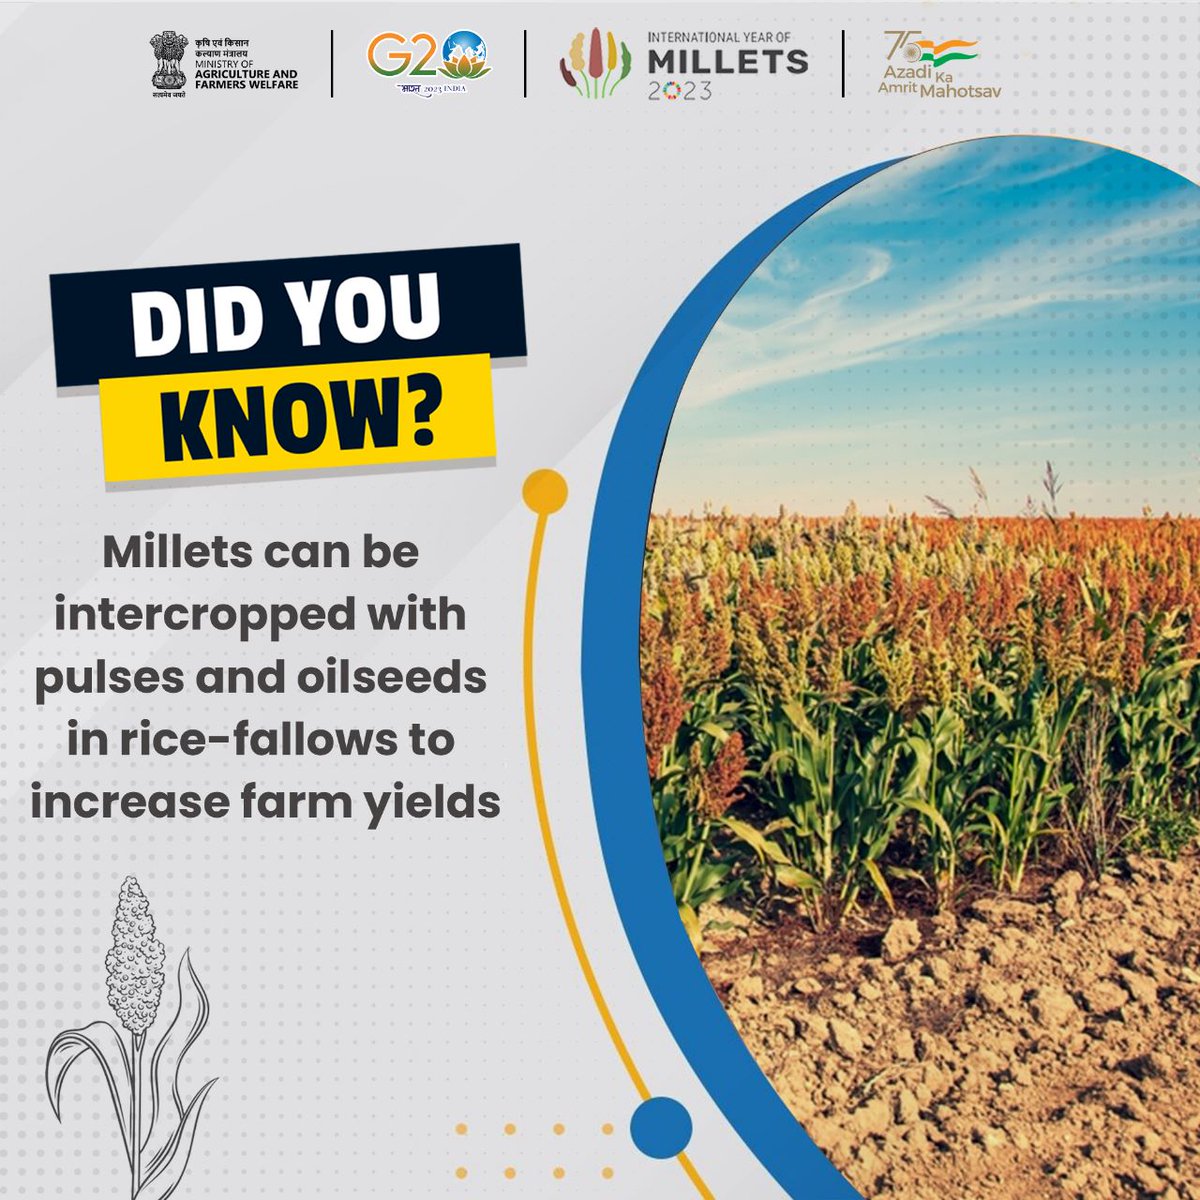 To amplify agricultural yields, cultivators can harness the potential of millets through intercropping with pulses and oilseeds during rice-fallows

#IYM2023 #YearofMillets #ShreeAnna